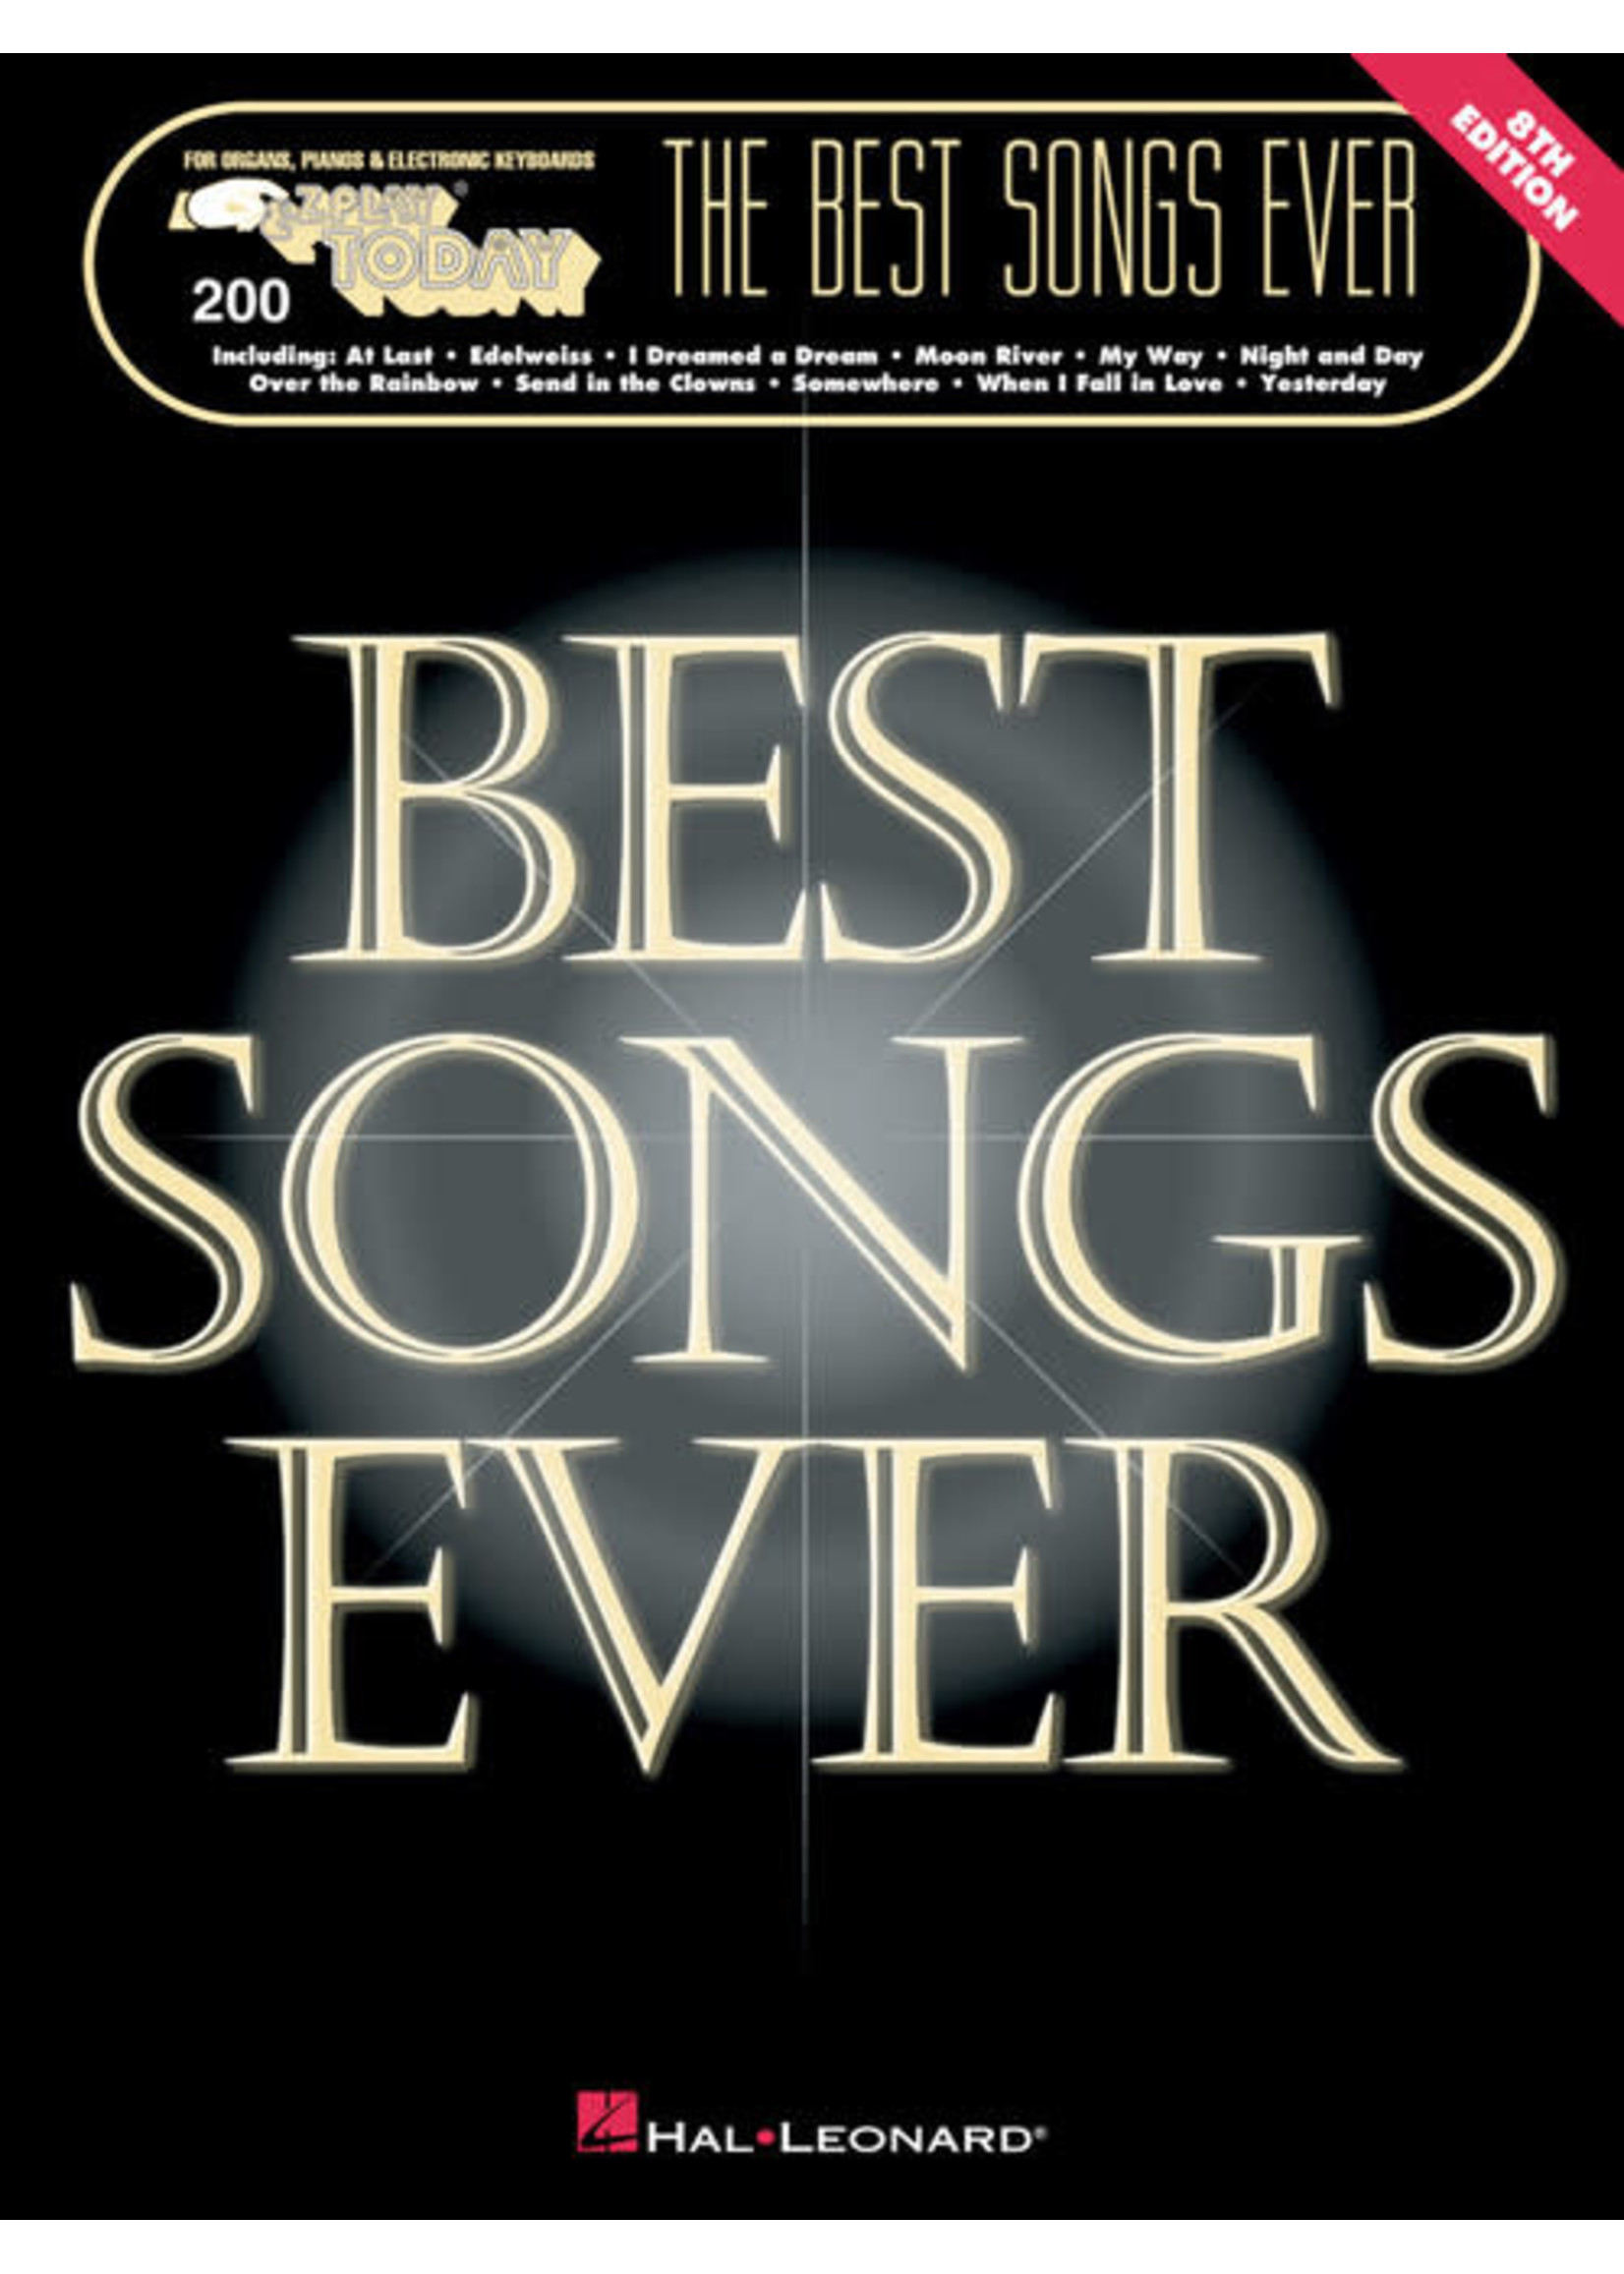 Hal Leonard EZ Play 200 - The Best Songs Ever (8th Edition)